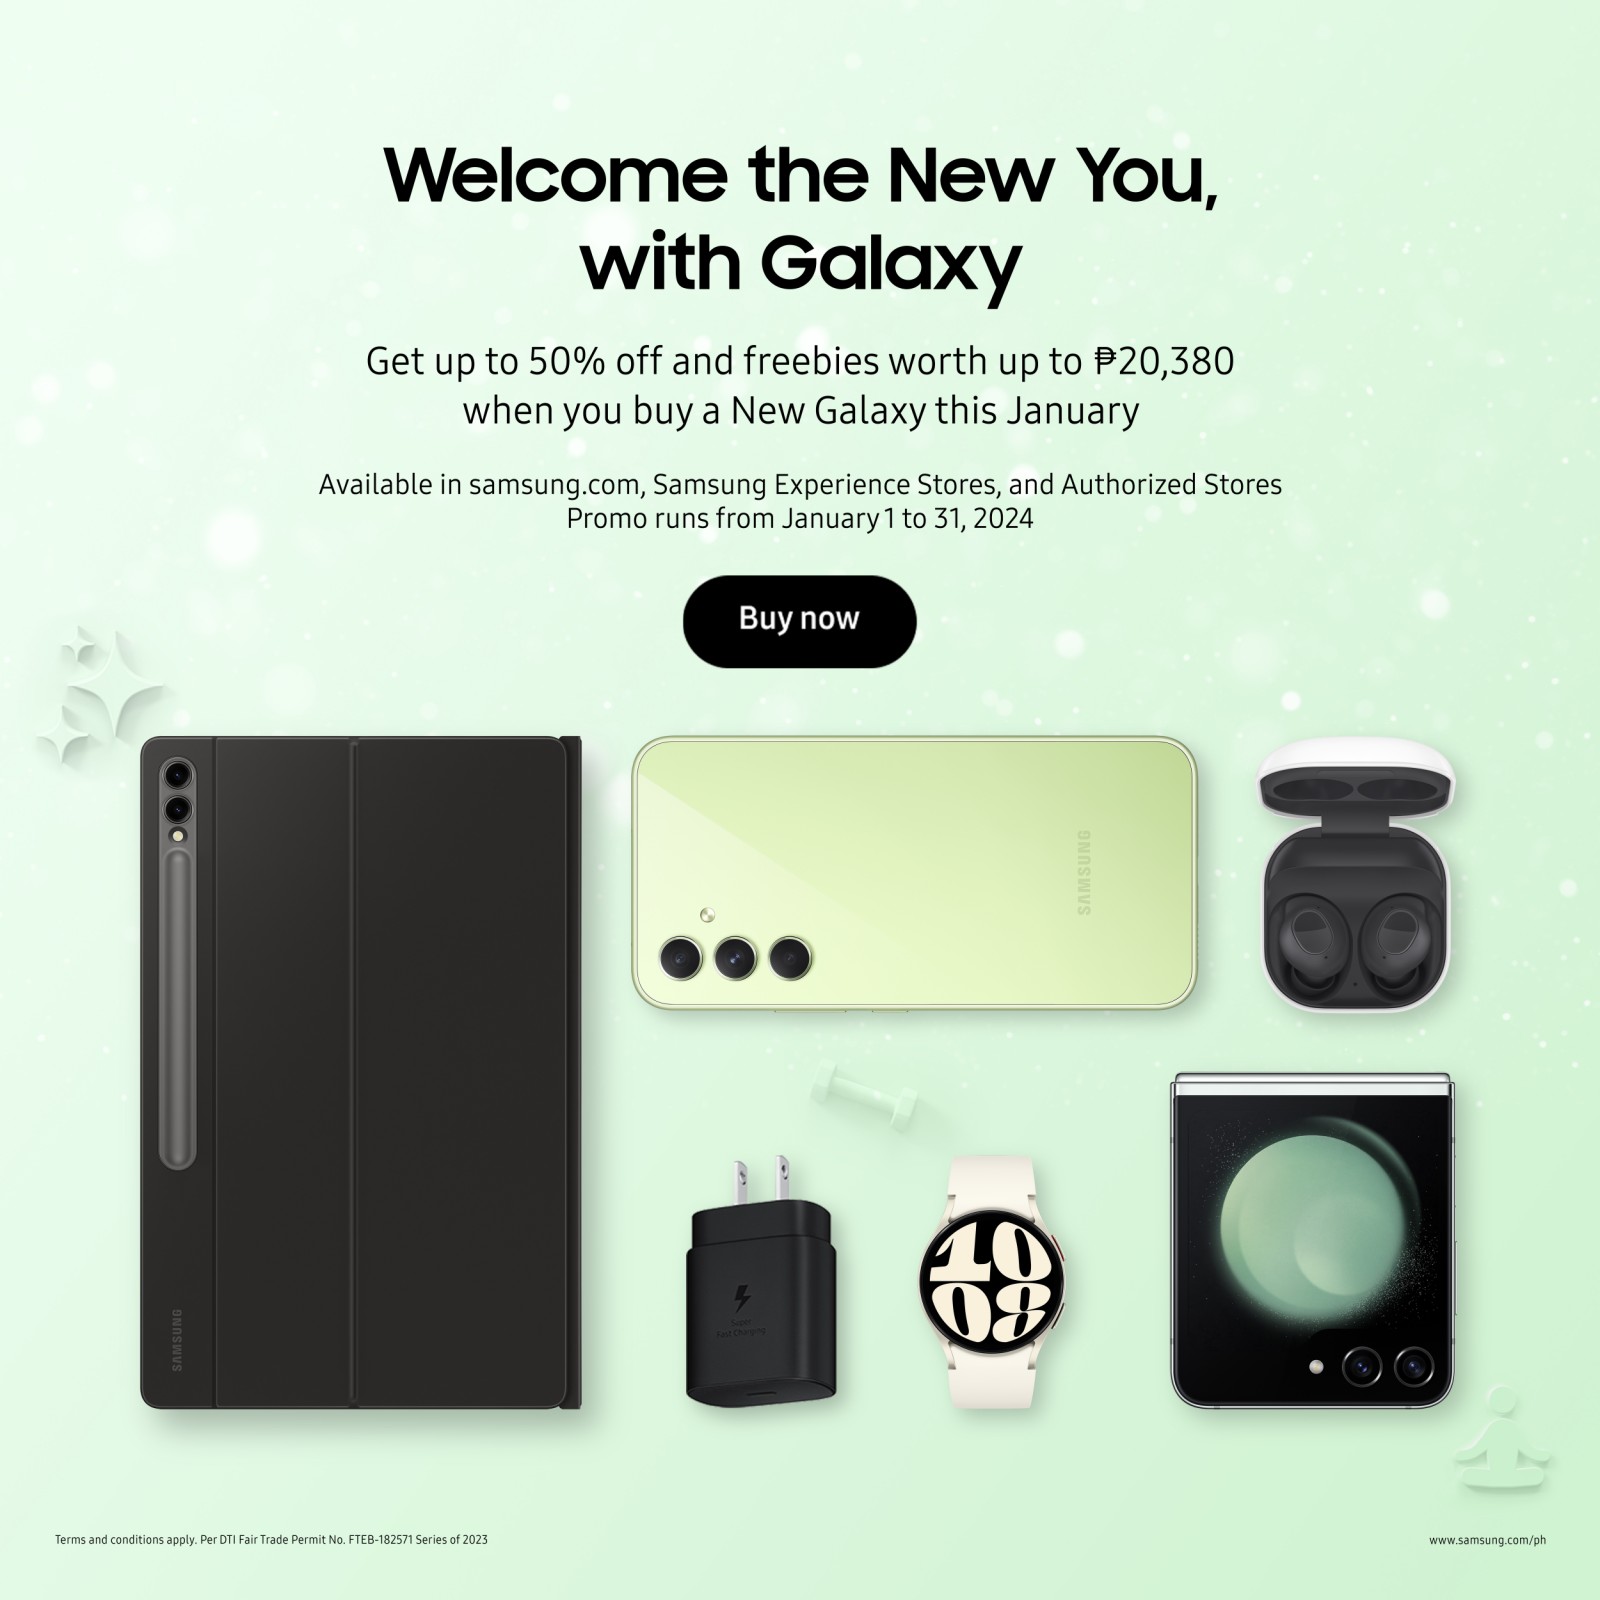 Treat yourself to a new Galaxy mobile device and be the best YOU ever this 2024! Create more, play more, save more and connect more through gadgets with the latest features to help you experience moments at their finest and enable you to achieve your life goals.  